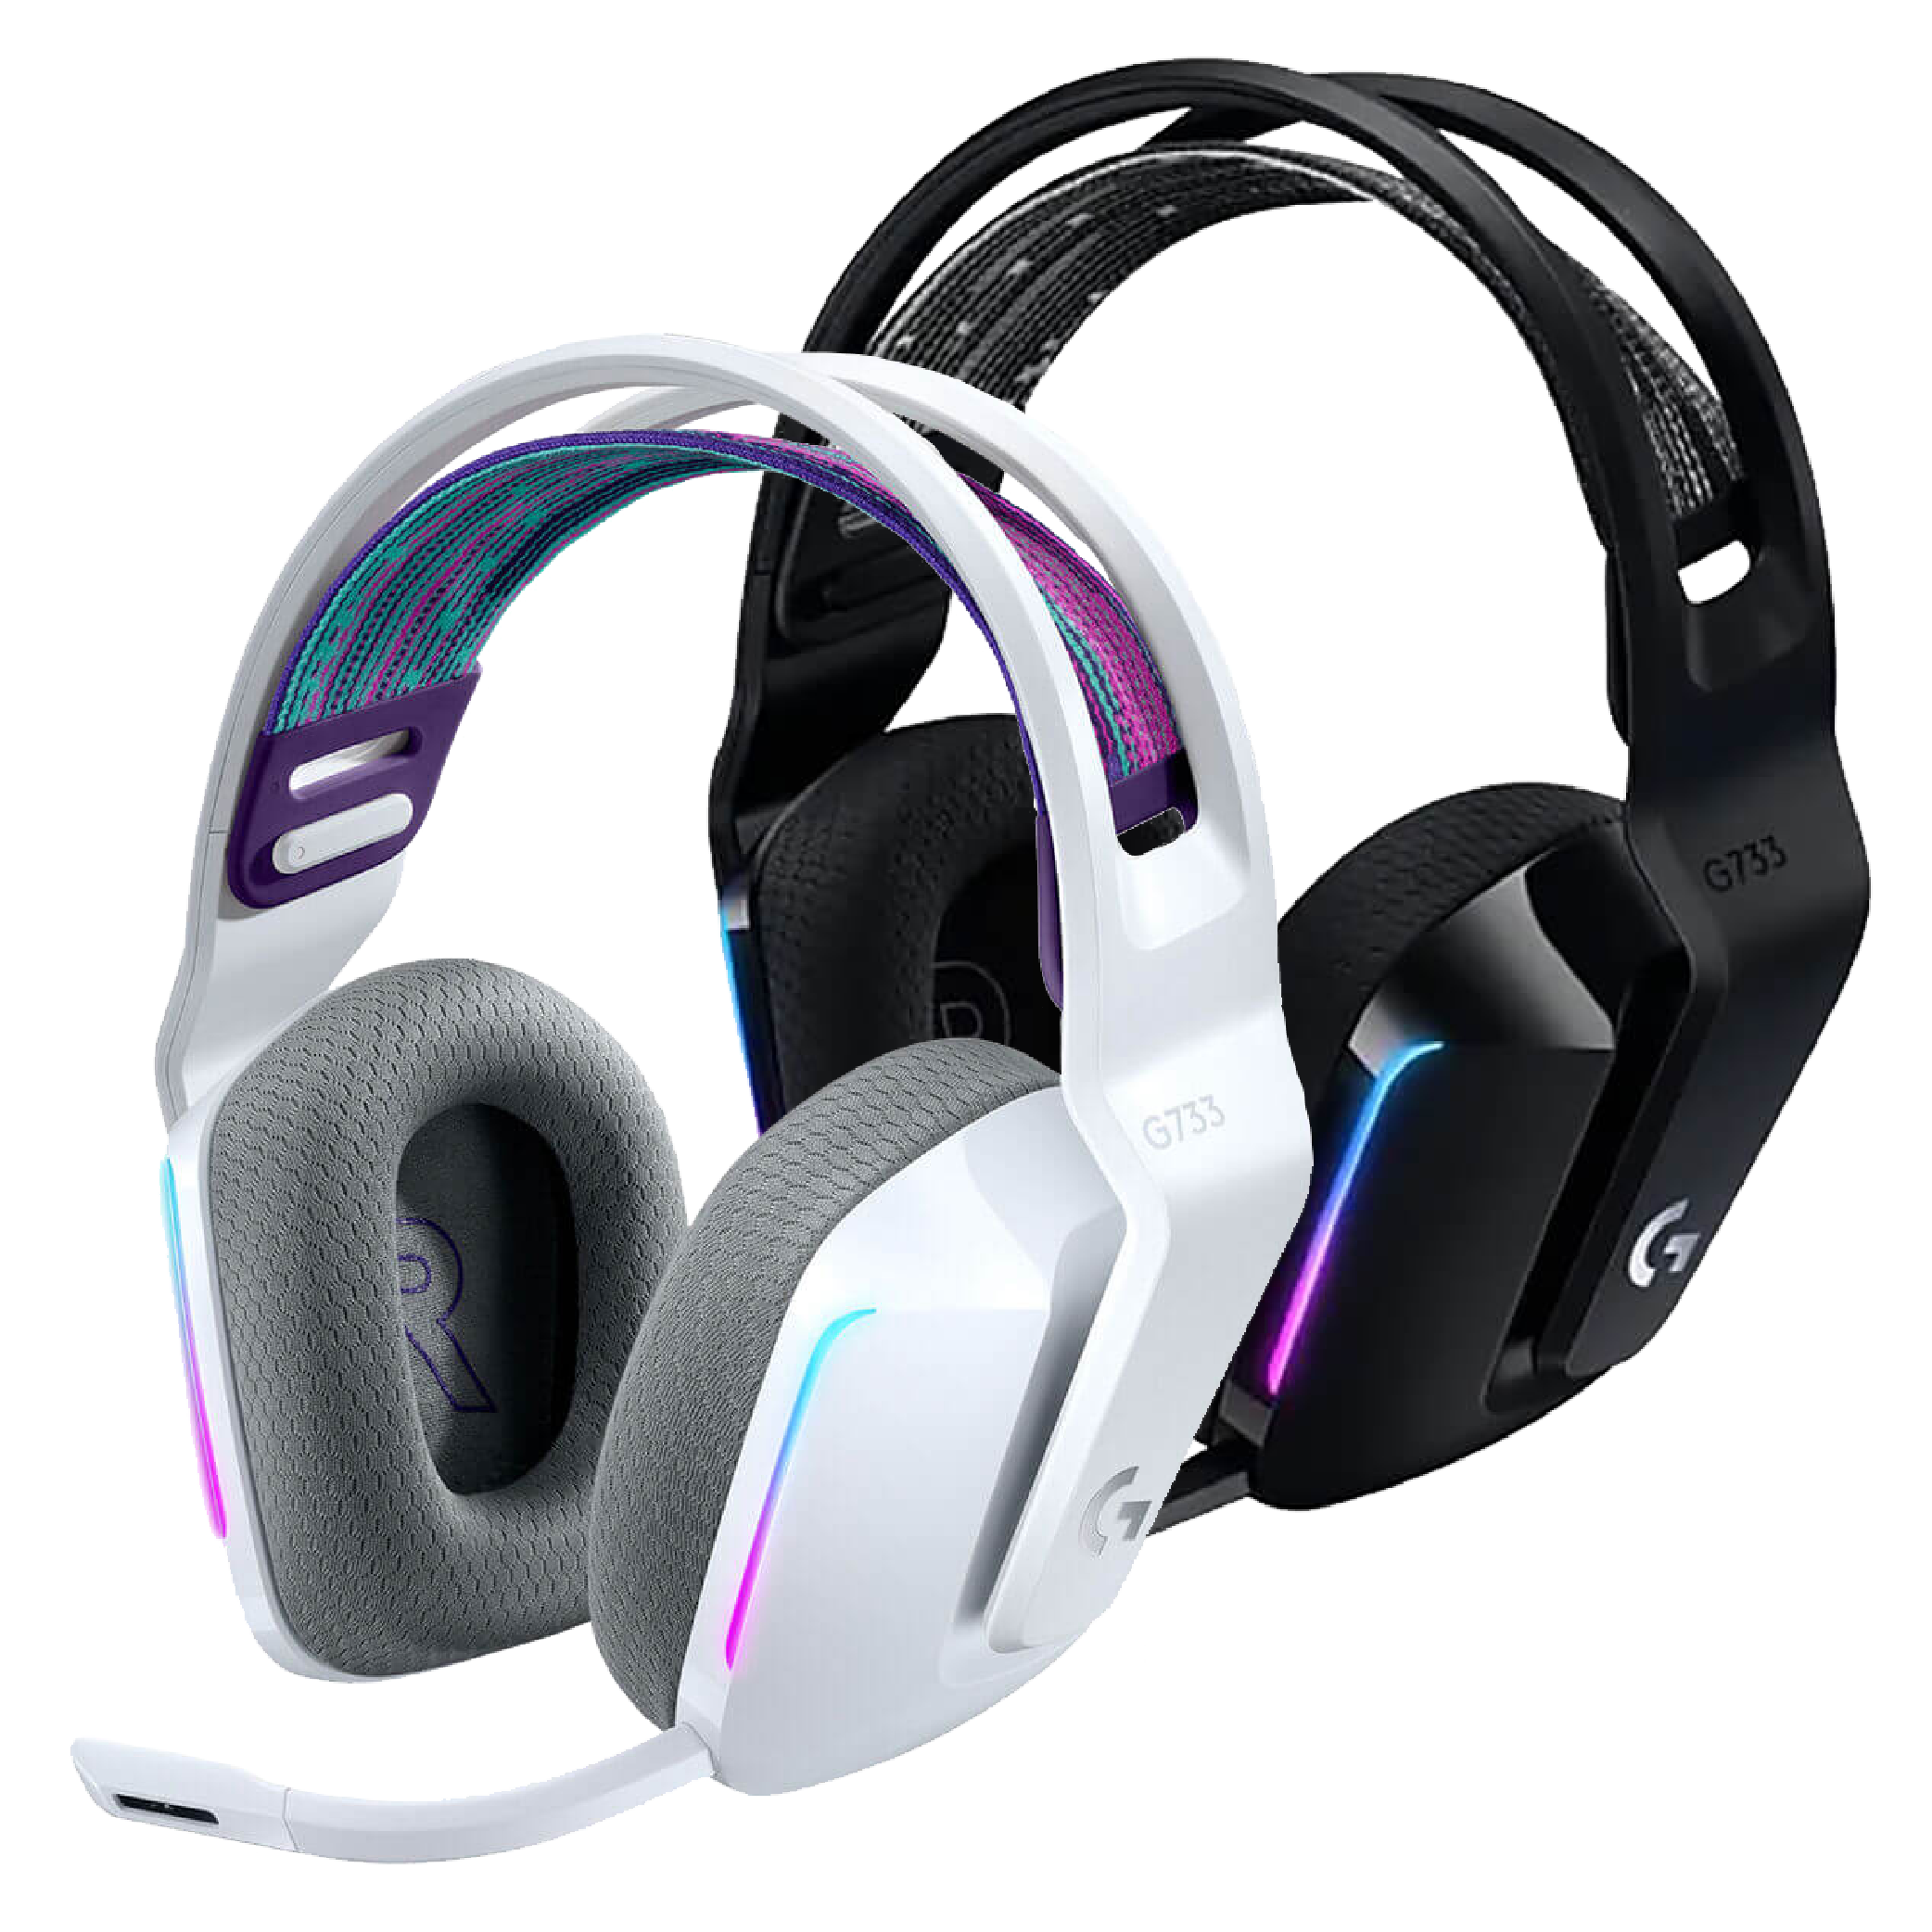 G Series G733 Black Wireless Over-the-Ear Gaming Headset